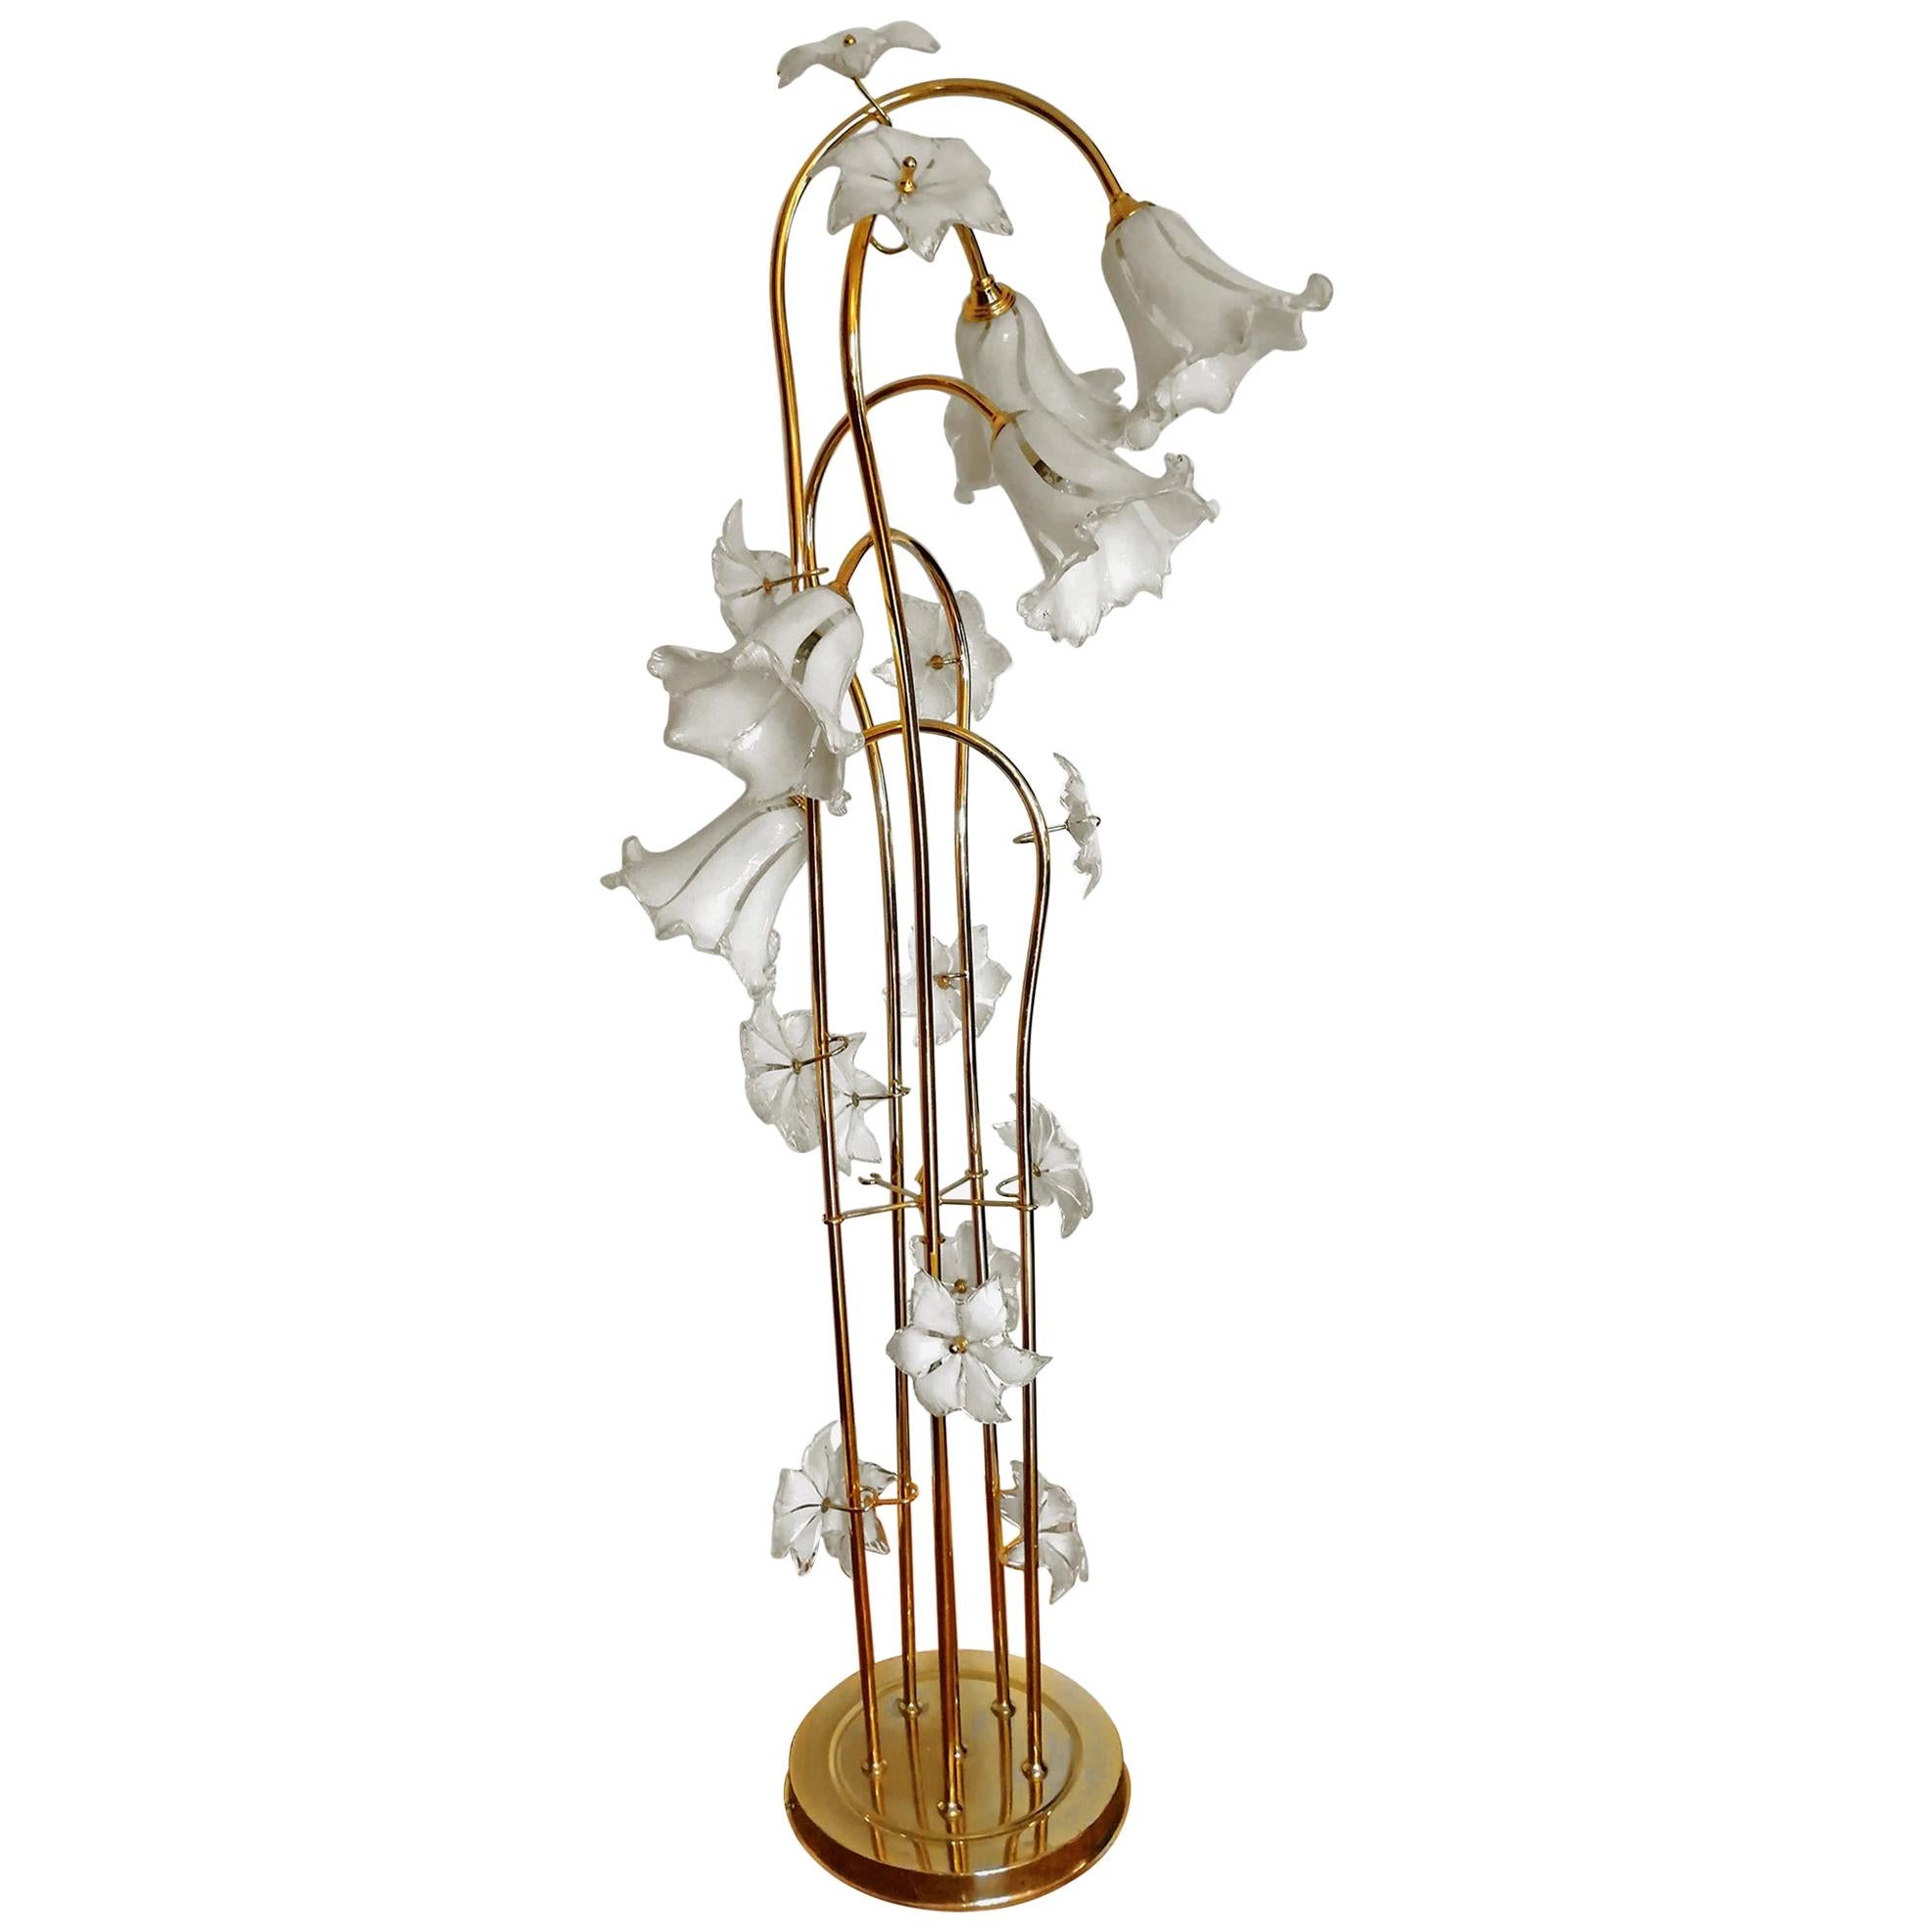 Hollywood Regency Mid-Century Modern glass flower bouquet gilt brass tree modernist floor lamp,
Measures:
Height 59.05 in/ 150 cm
Width 23.62 in/ 60 cm
Weight 33 lb/ 15 kg
Five light bulbs - E 14- good working condition/European wiring
Your